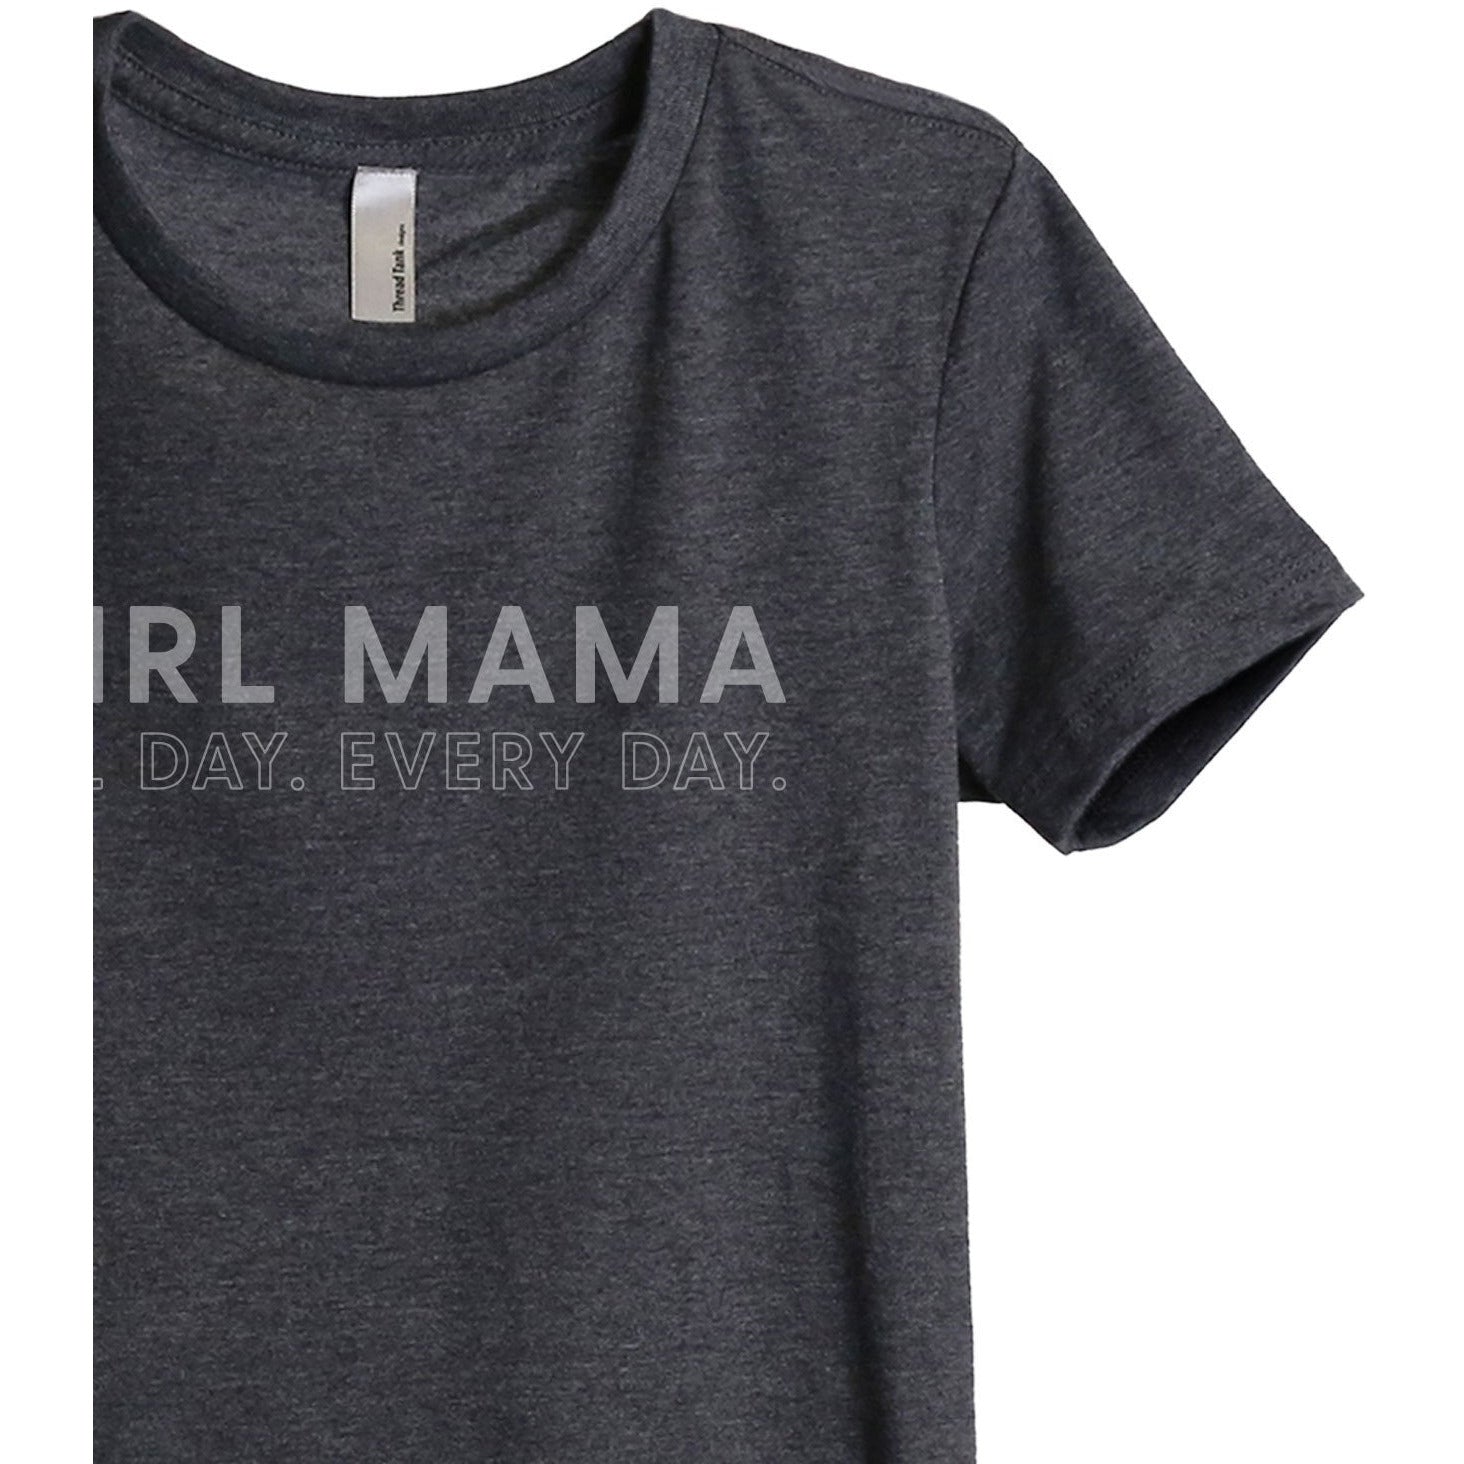 Girl Mama All Day Every Day Women's Relaxed Crewneck T-Shirt Top Tee Charcoal Grey Zoom Details